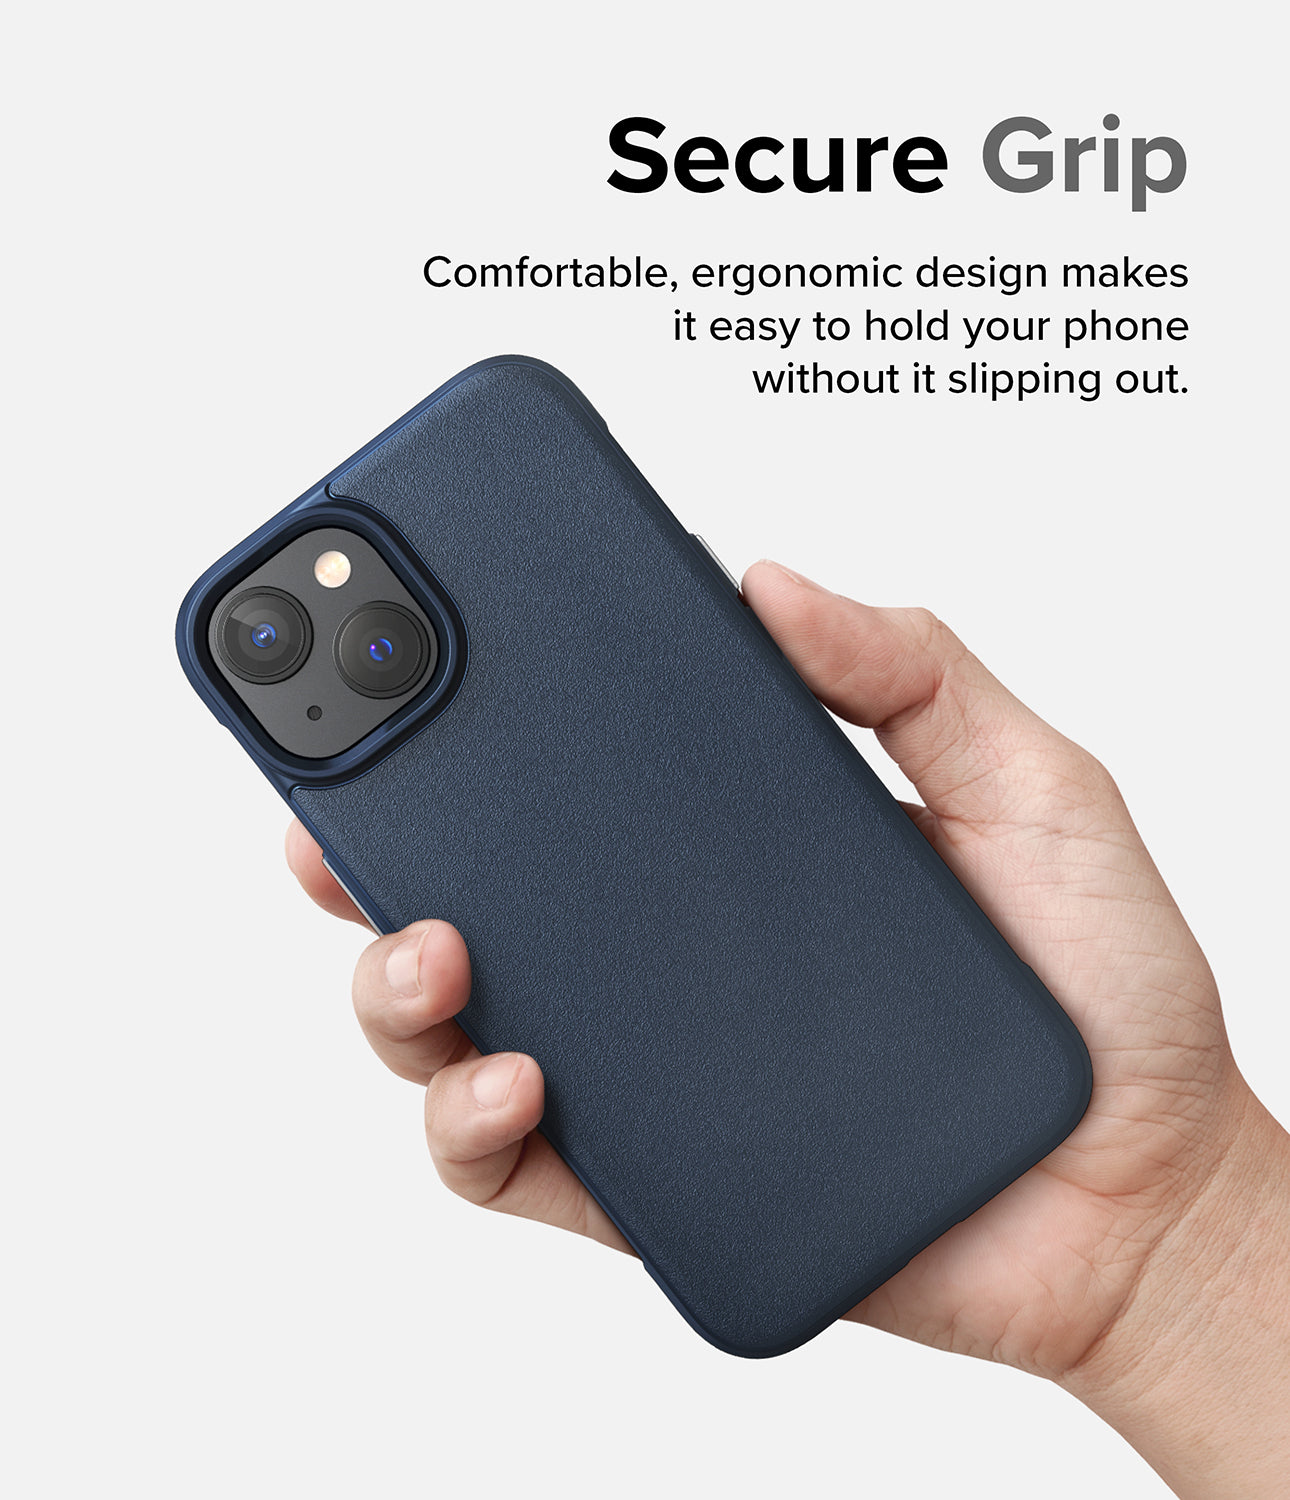 iPhone 14 Case | Onyx - Navy - Secure Grip. Comfortable, ergonomic design makes it easy to hold your phone without it slipping out.